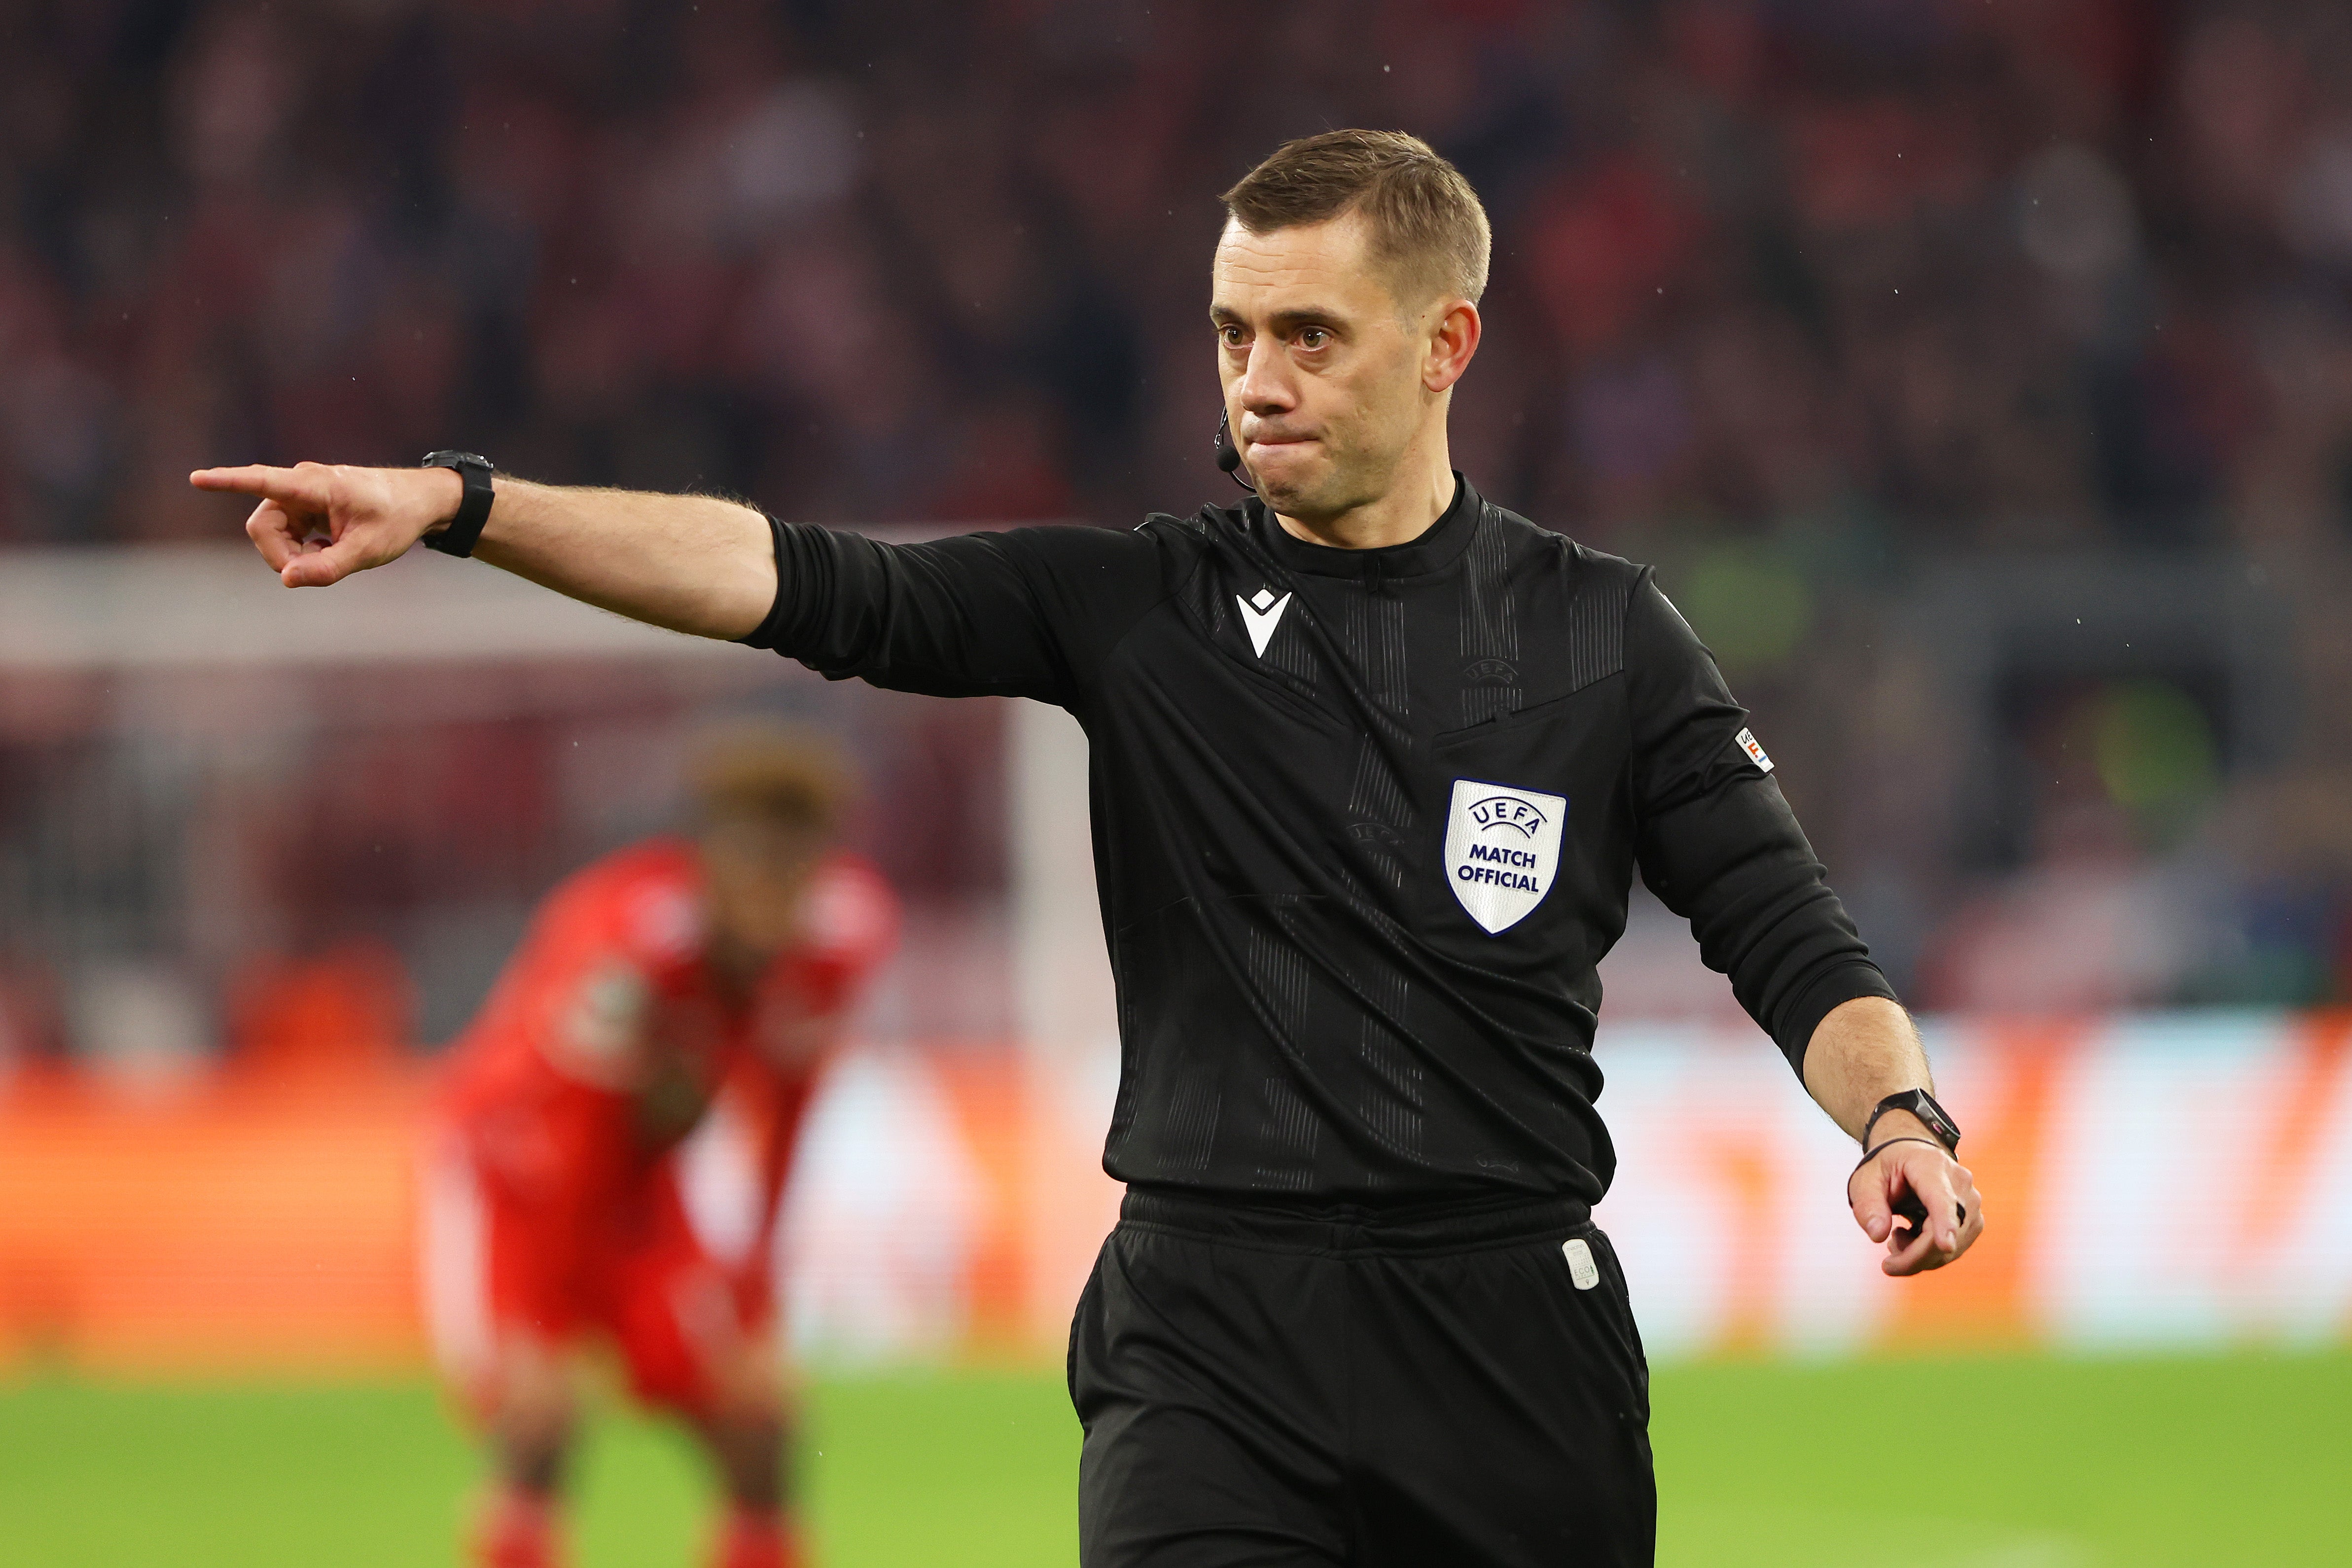 Clement Turpin will be the referee for England vs Slovenia